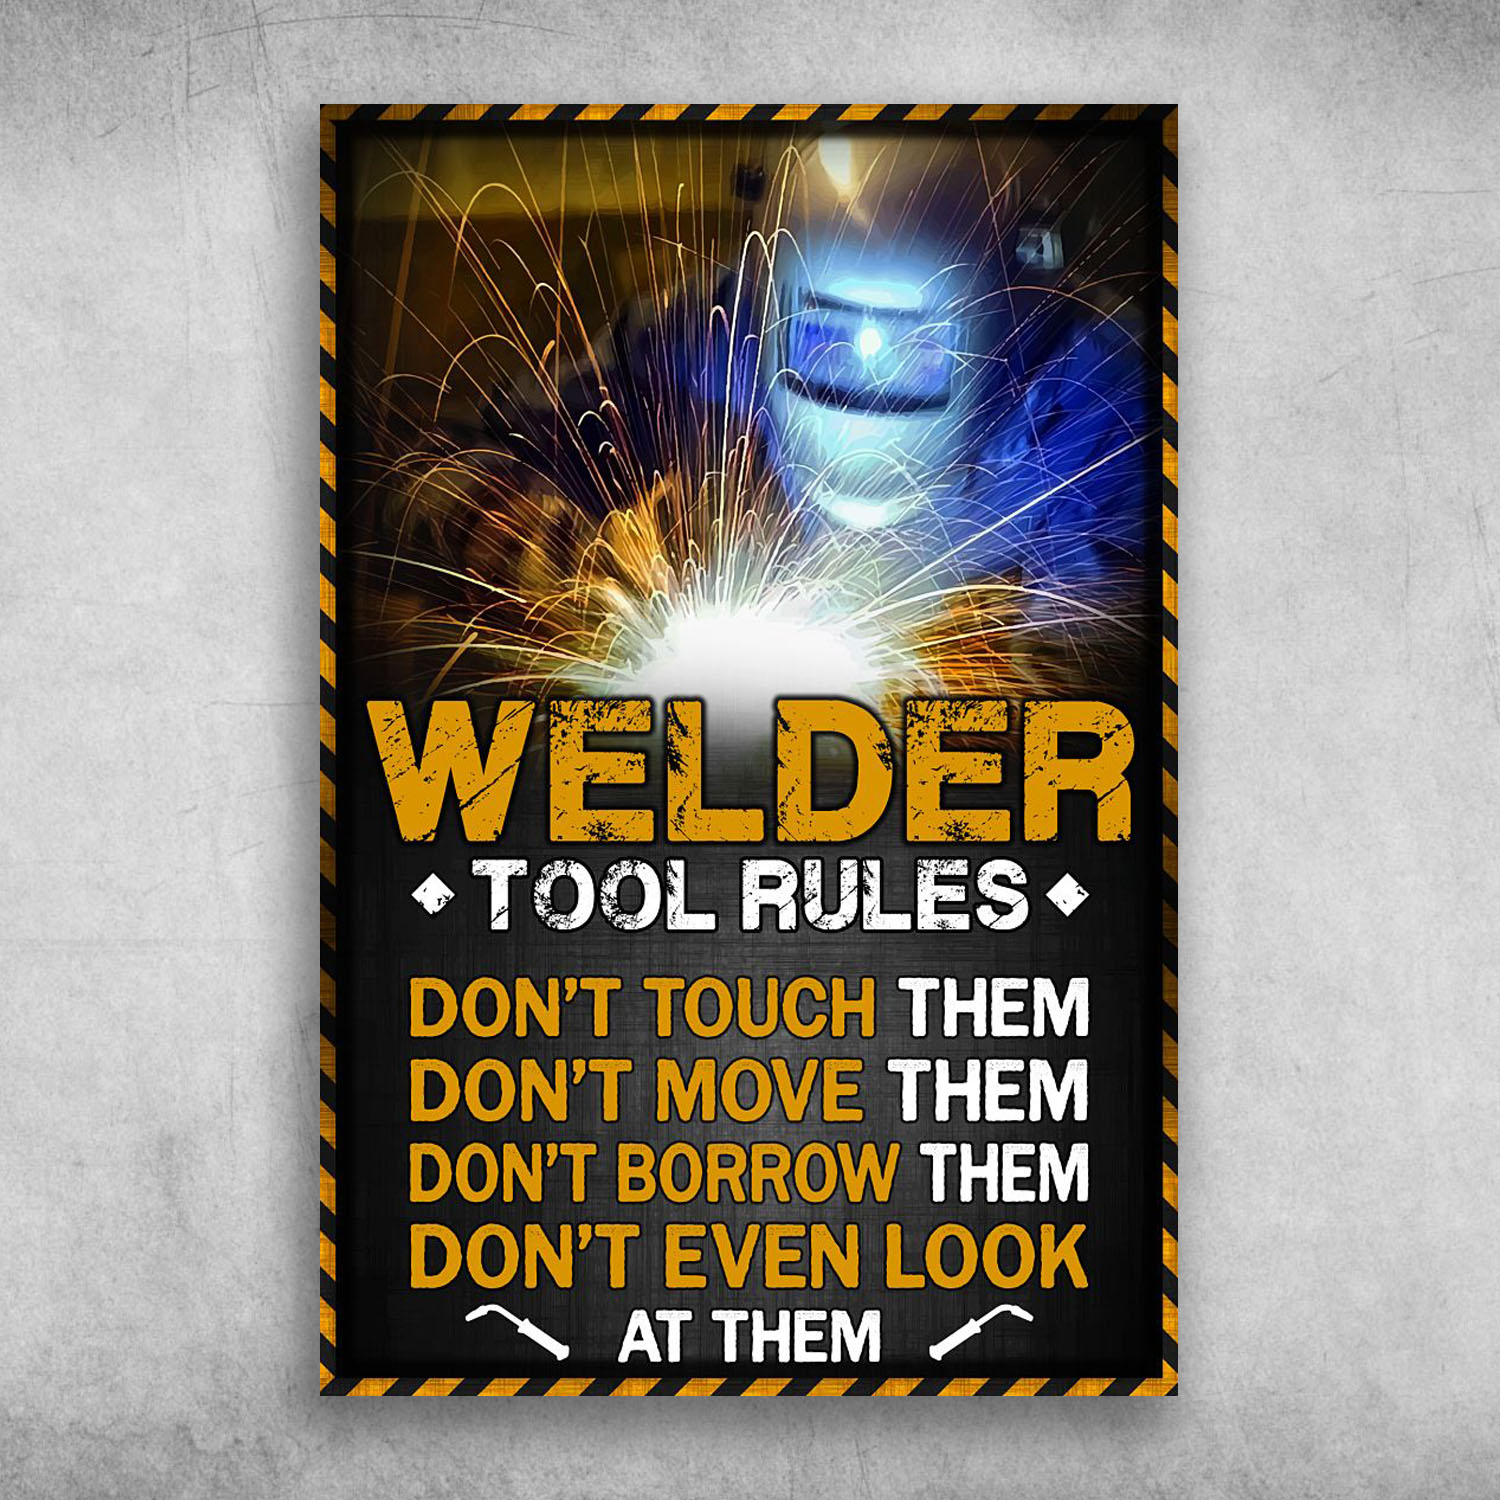 Welder Tool Rules Don't Touch Them